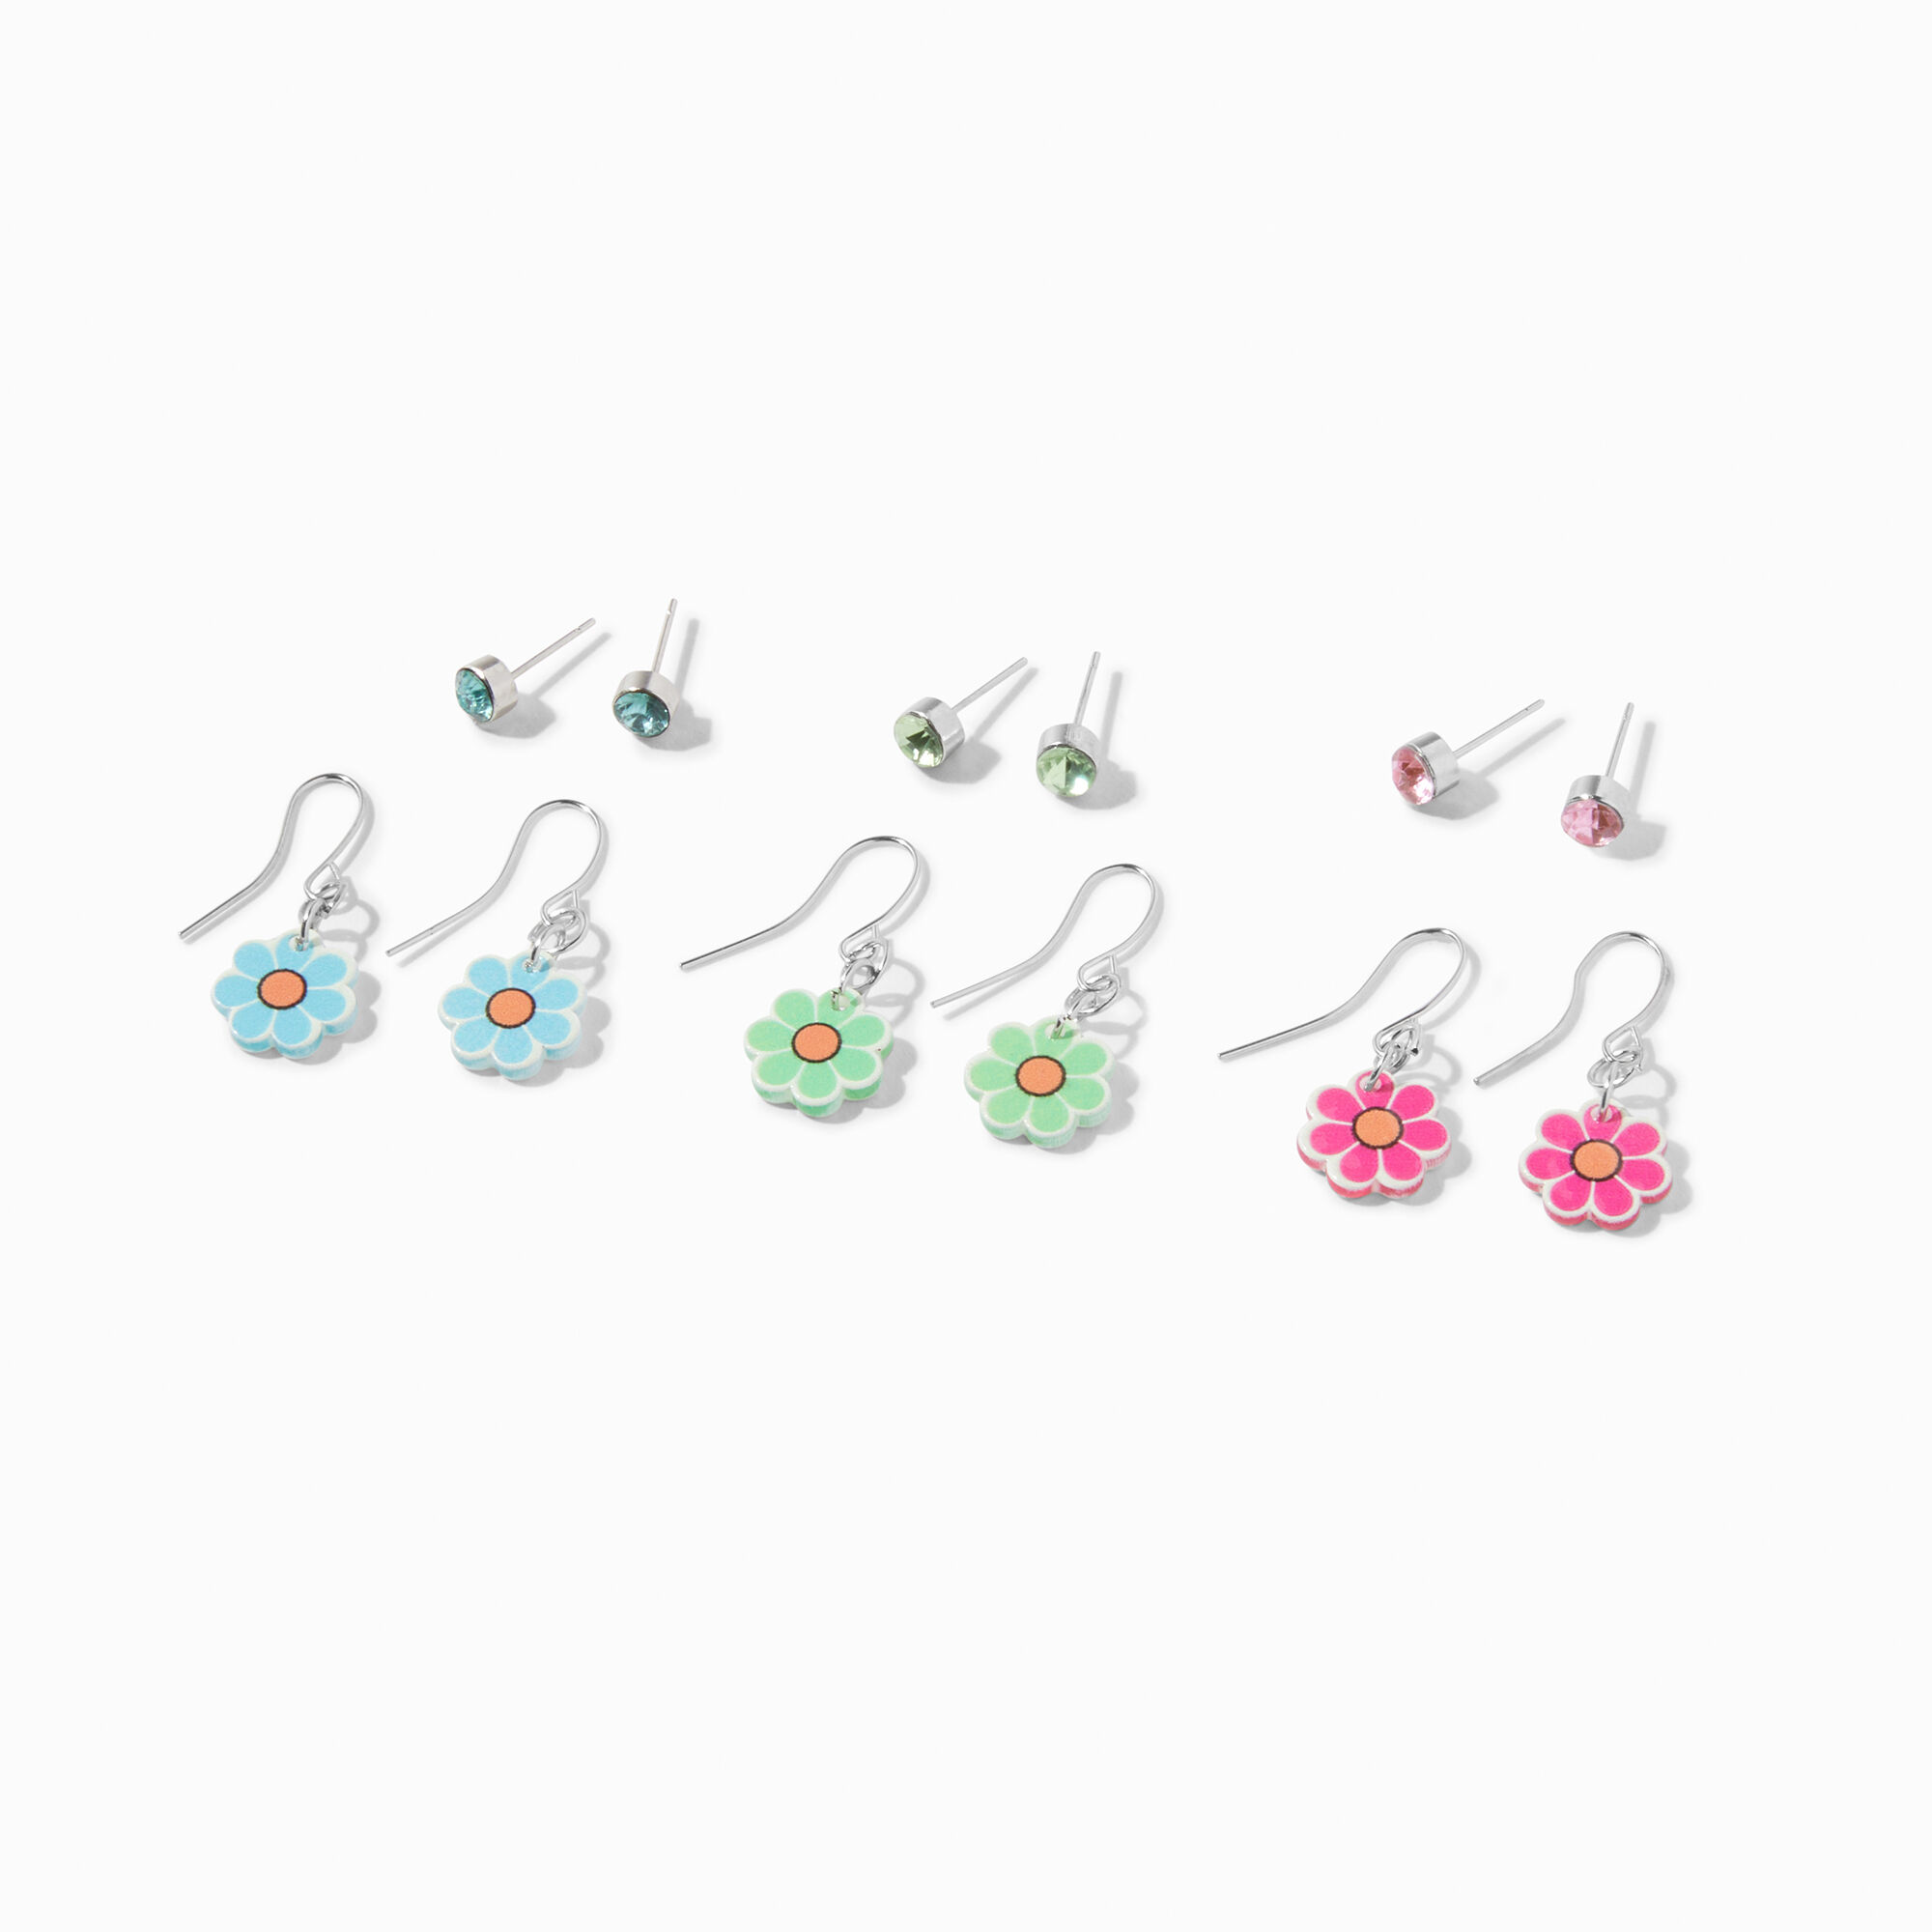 View Claires Tone Rainbow Daisy Drop Stud Earrings 6 Pack Silver information